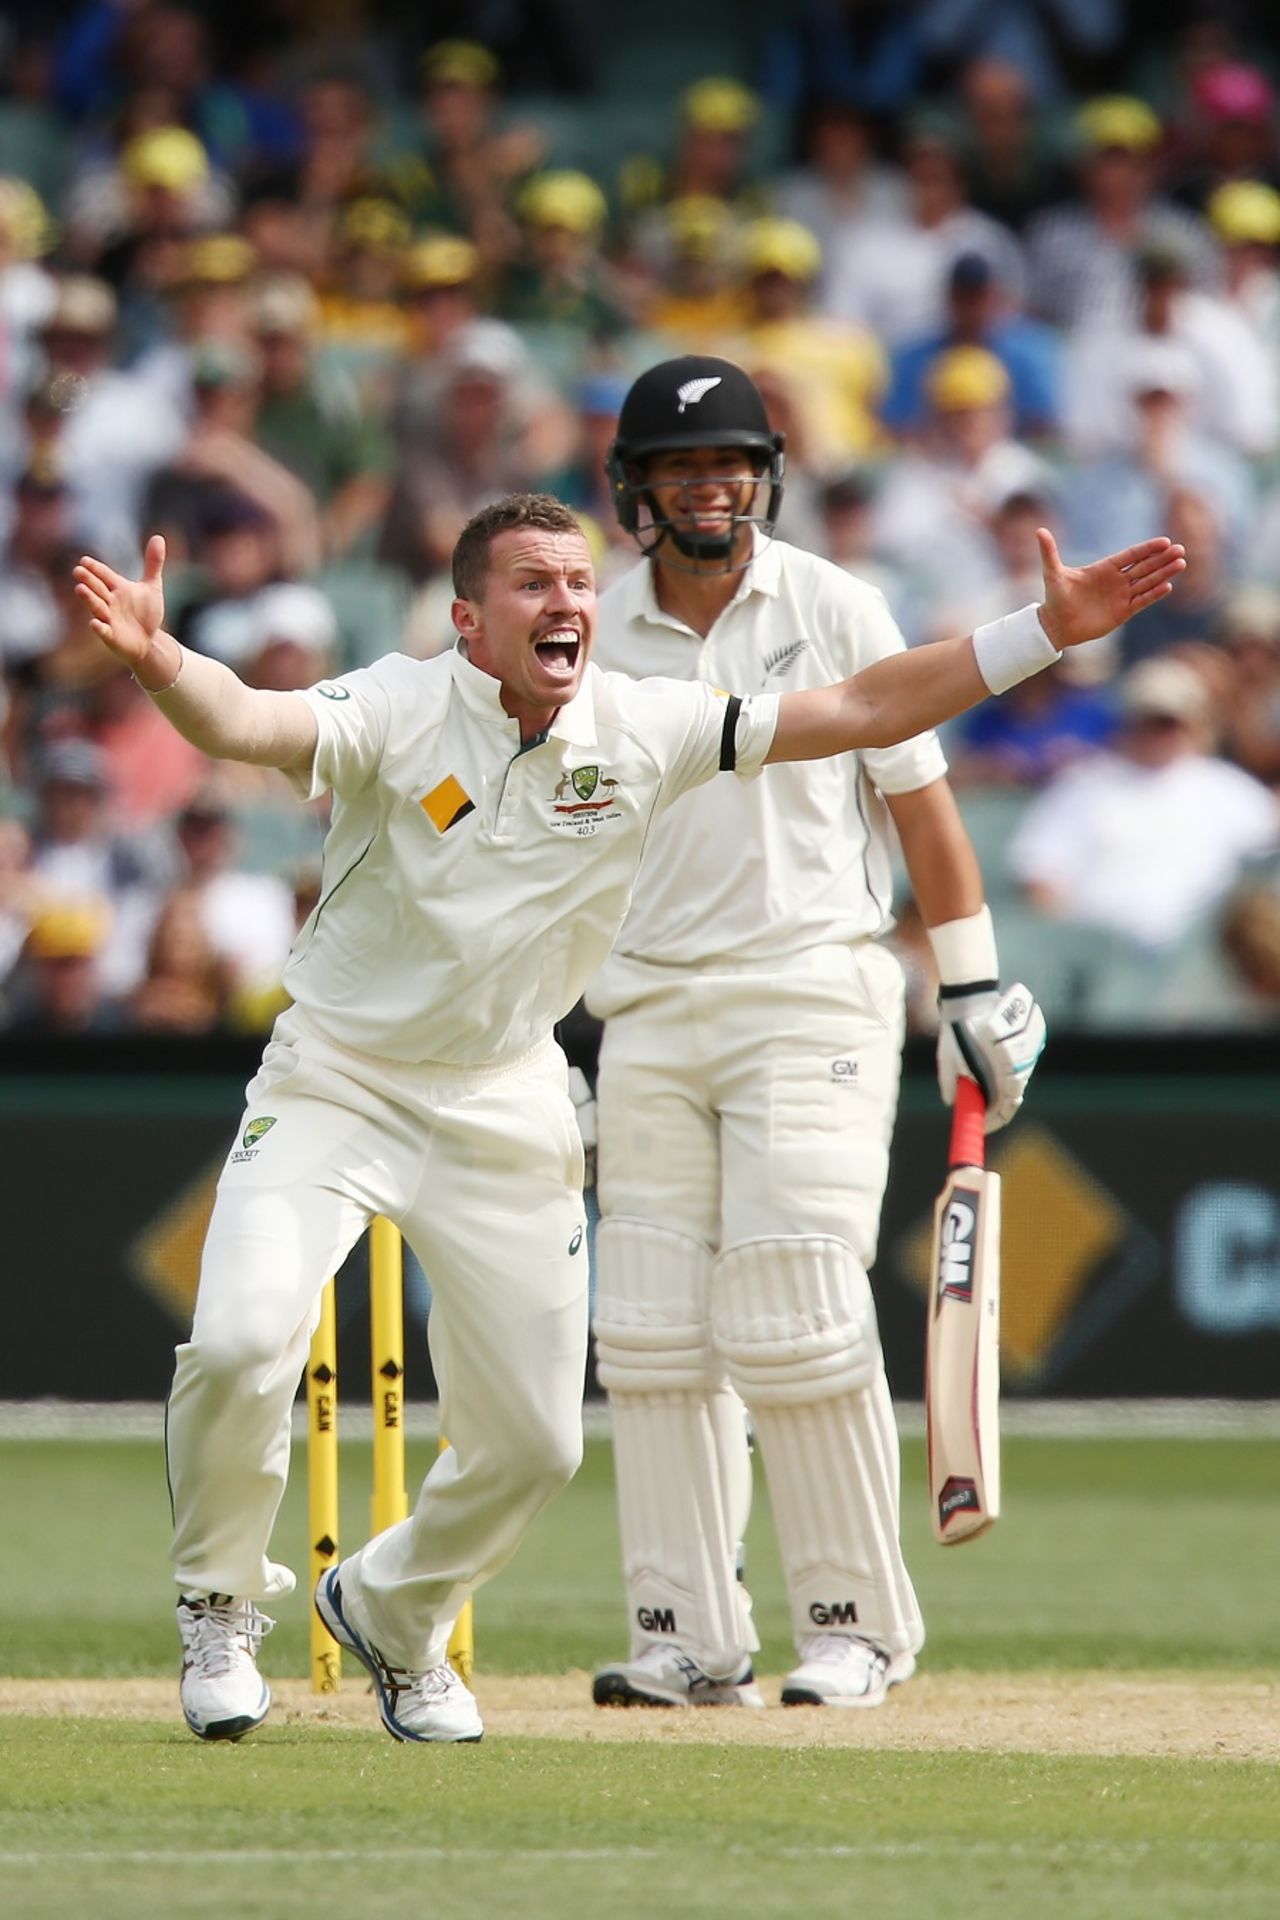 Peter Siddle implores the umpire for the wicket of Ross Taylor, Australia v New Zealand, 3rd Test, Adelaide, November 27, 2015